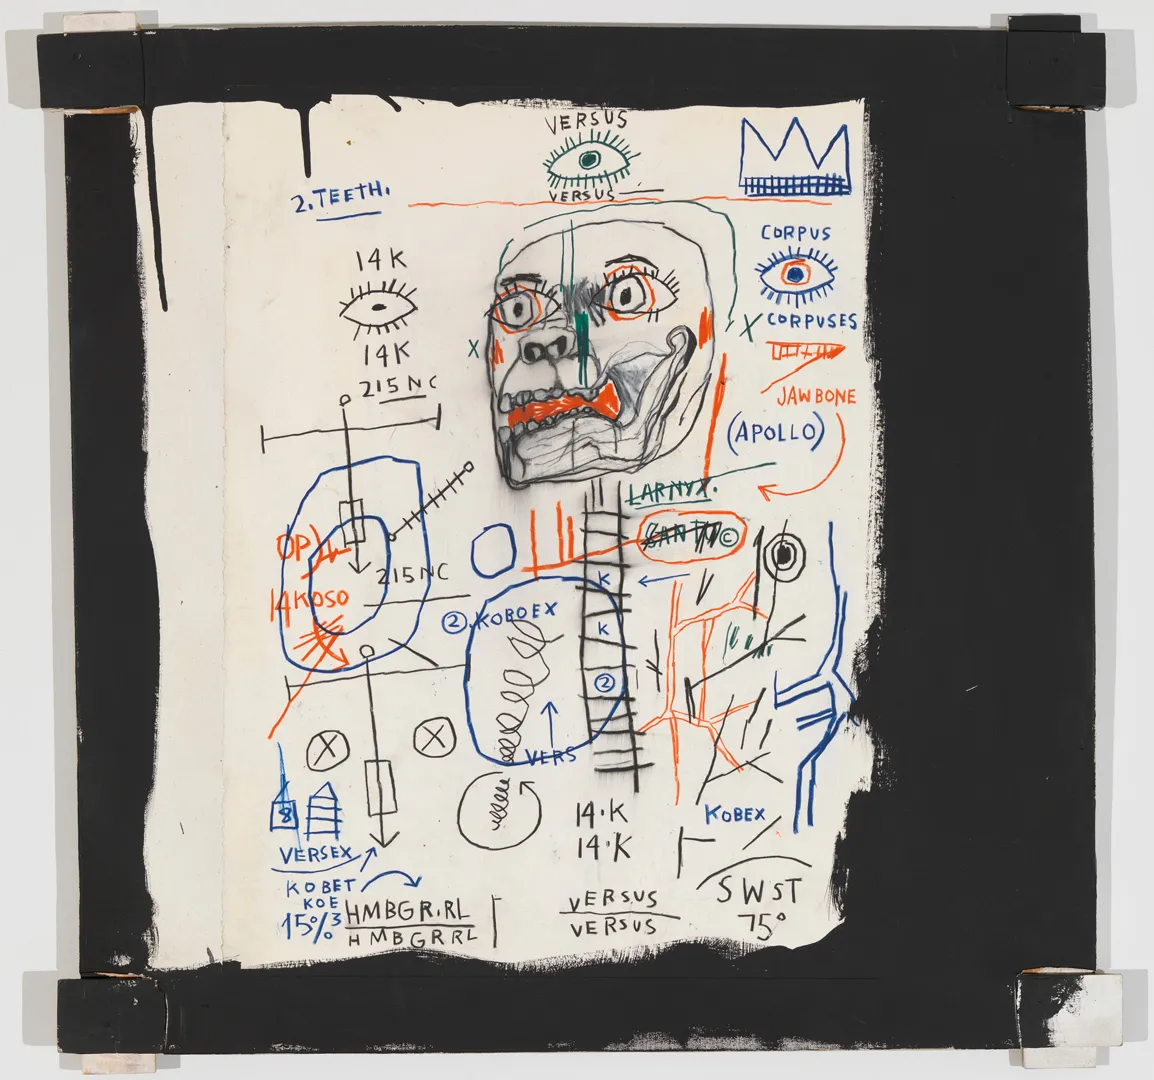 Jean‐Michel Basquiat - Santo 2, 1982, acrylic, oilstick, and paper on canvas with exposed wood supports